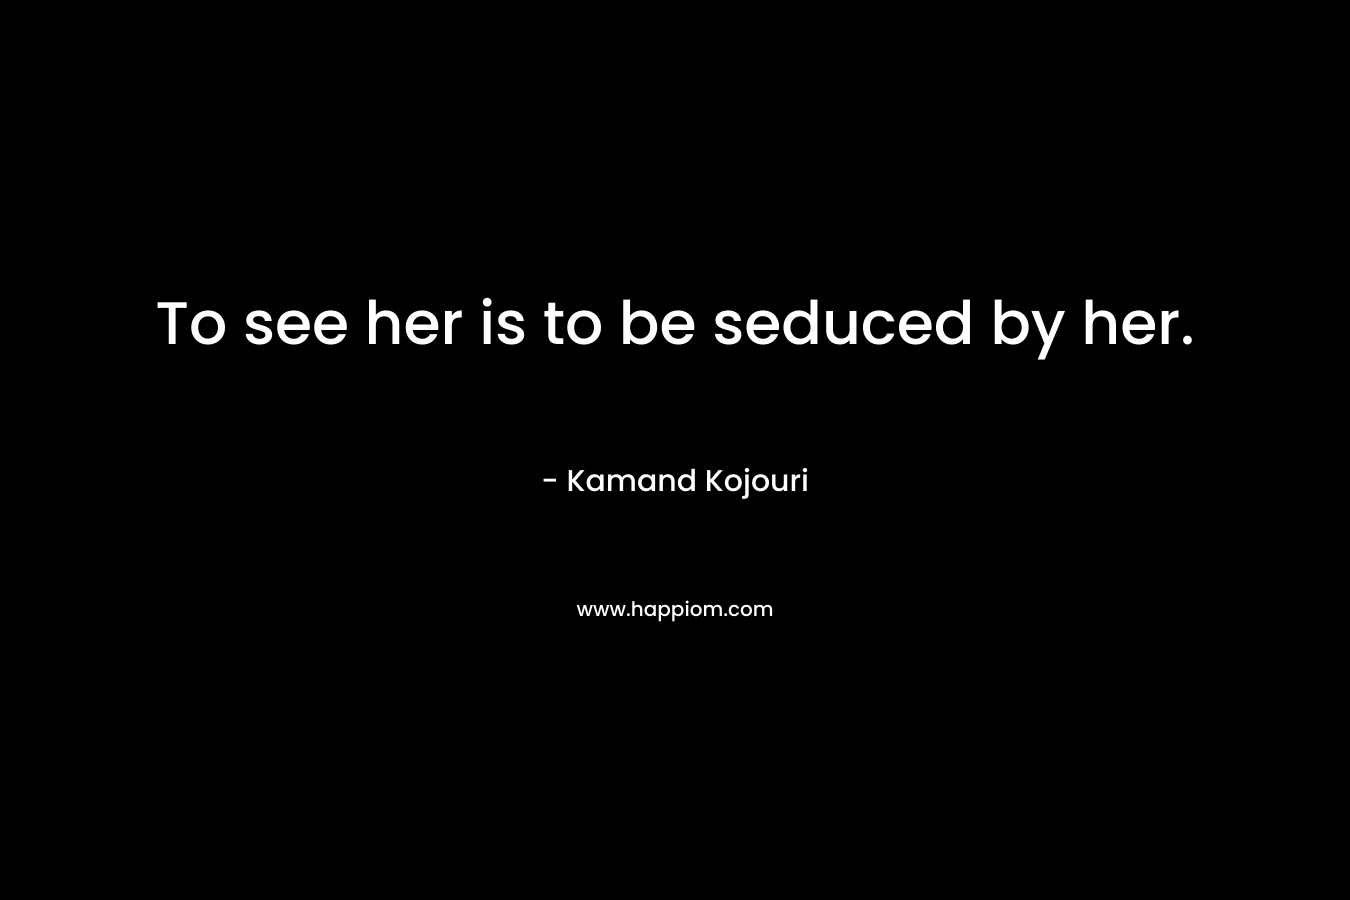 To see her is to be seduced by her.